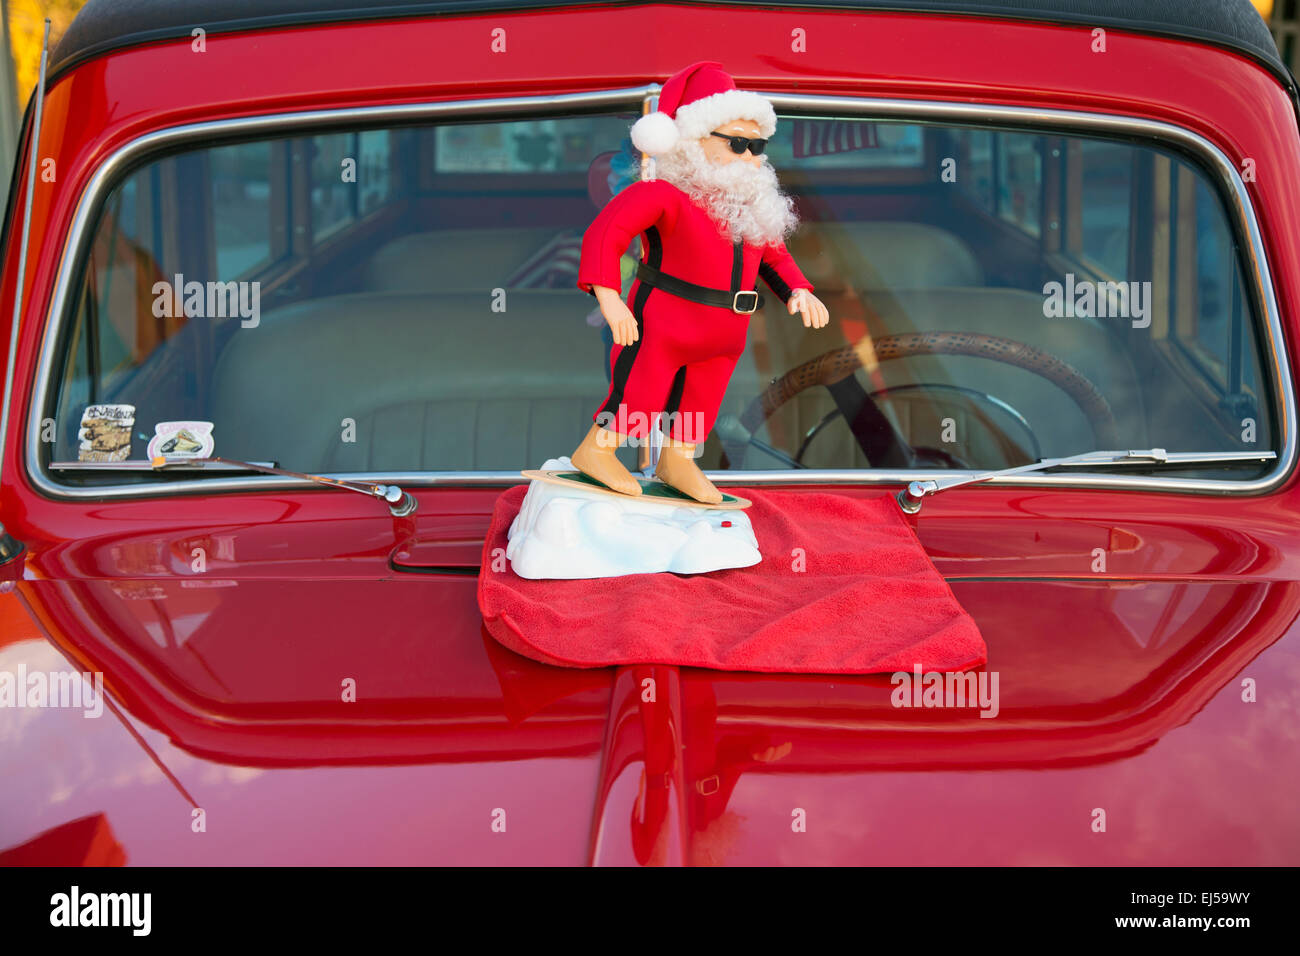 Surfing Santa Clause on a vintage red car hood, California, USA Stock Photo